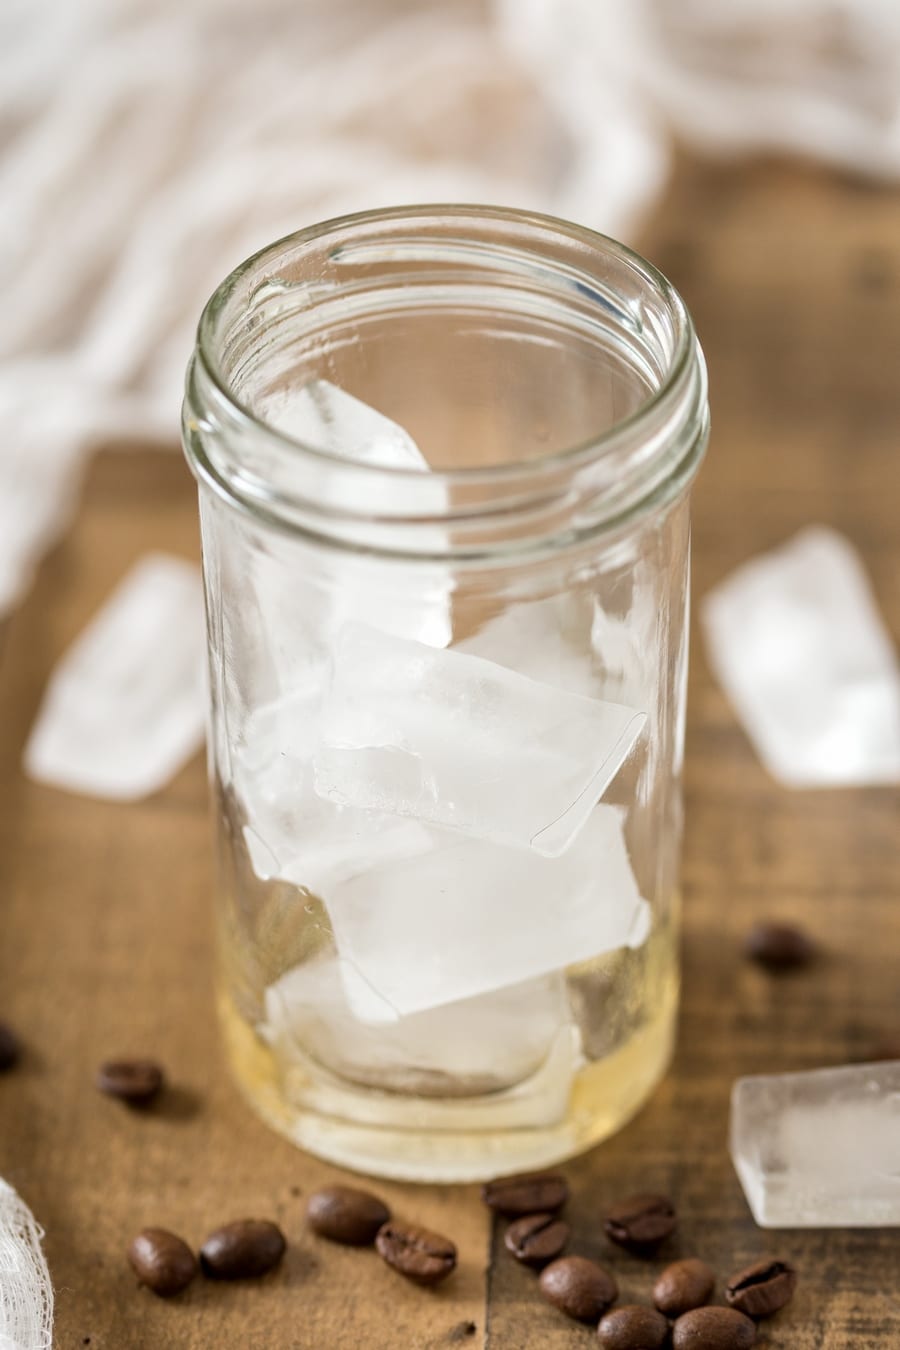 Vanilla syrup and ice cubes in a glass to make cardamom cold brew iced latte.